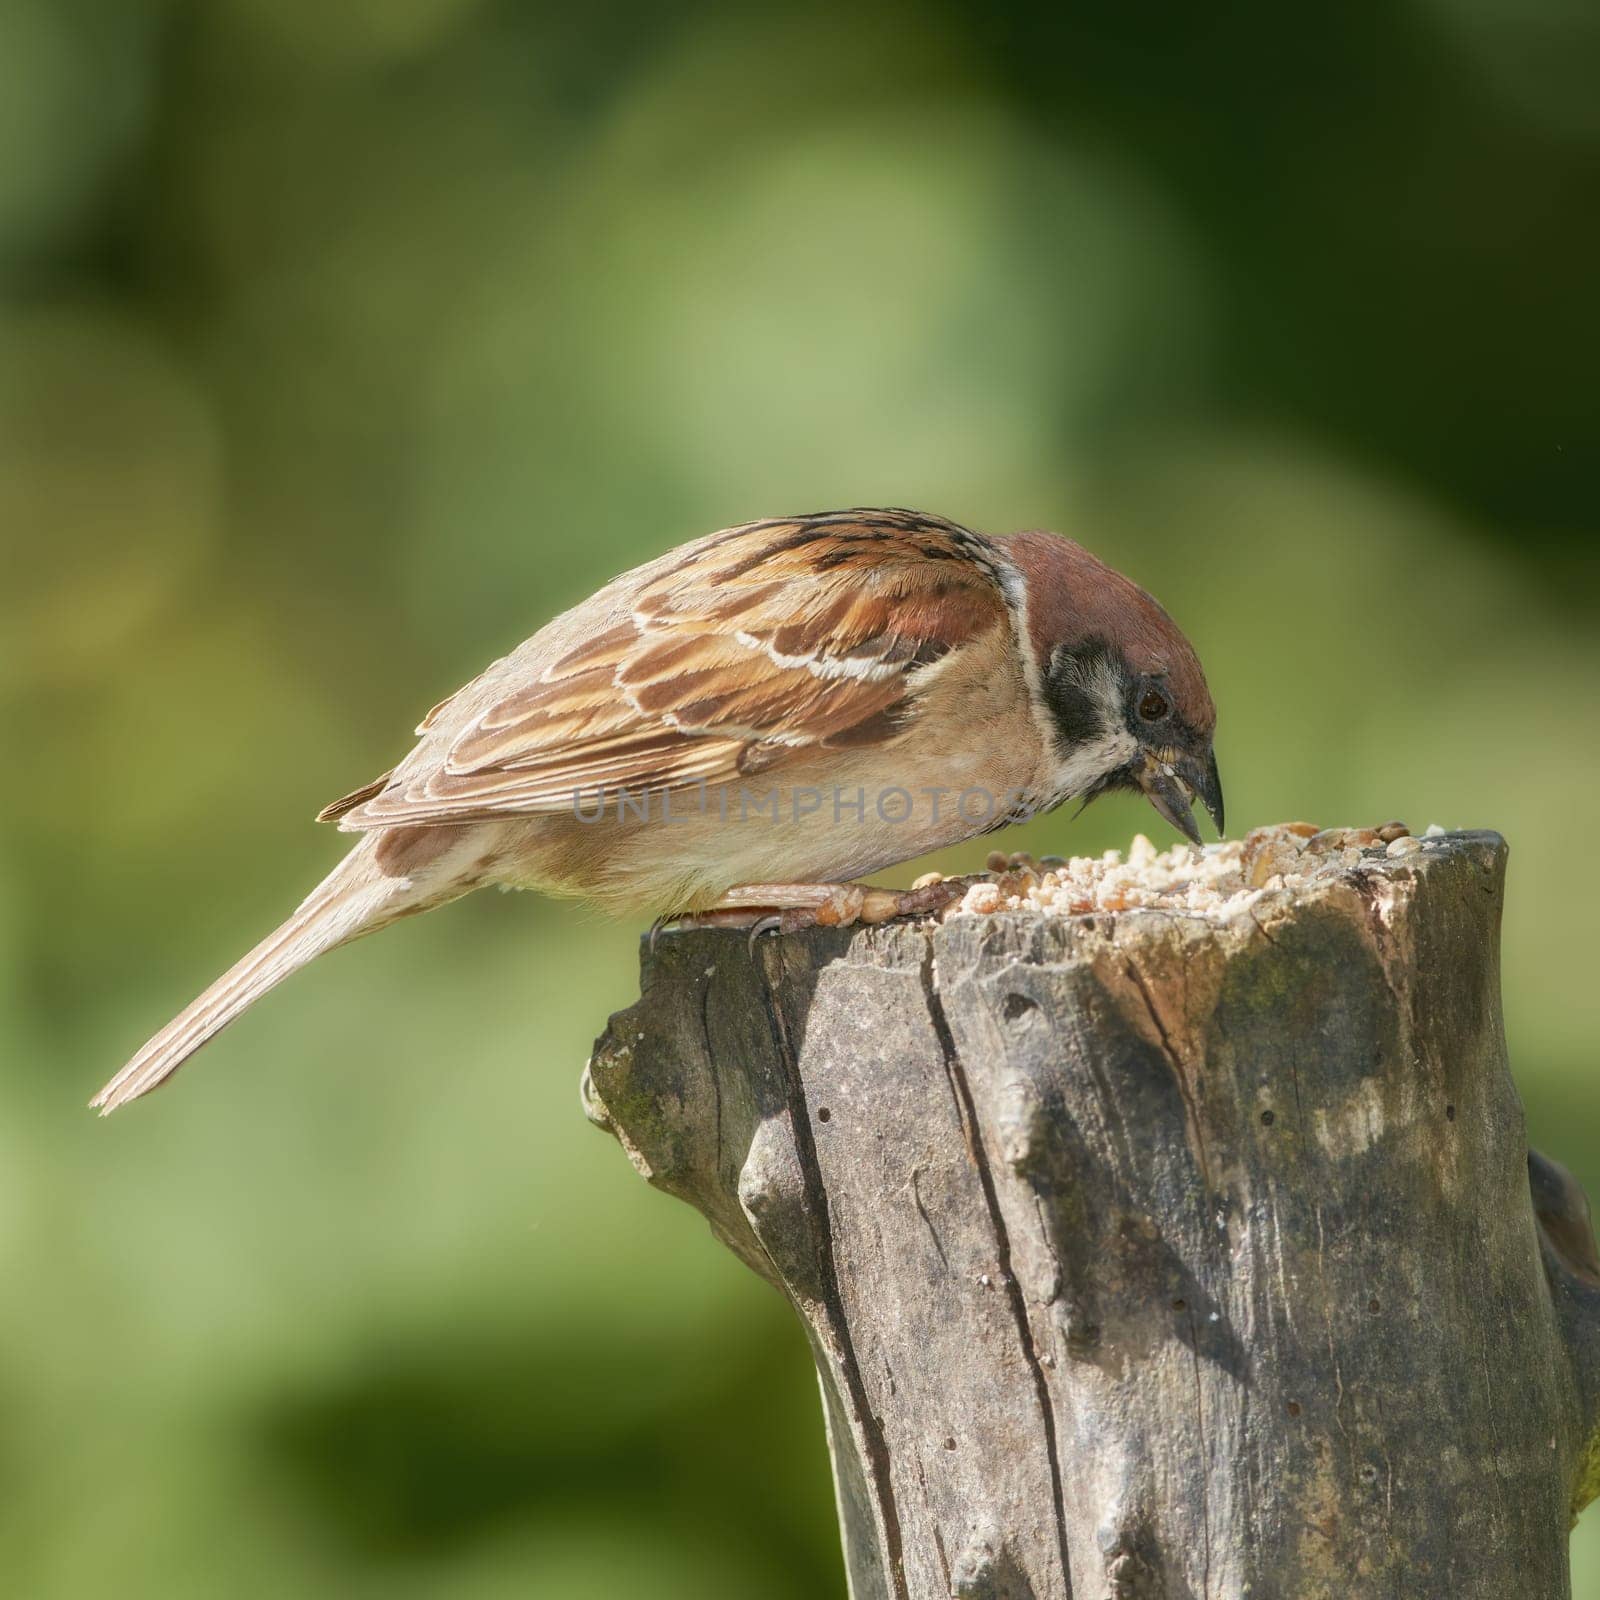 Sparrow. Sparrows are a family of small passerine birds, Passeridae. They are also known as true sparrows, or Old World sparrows, names also used for a particular genus of the family, Passer. by YuriArcurs